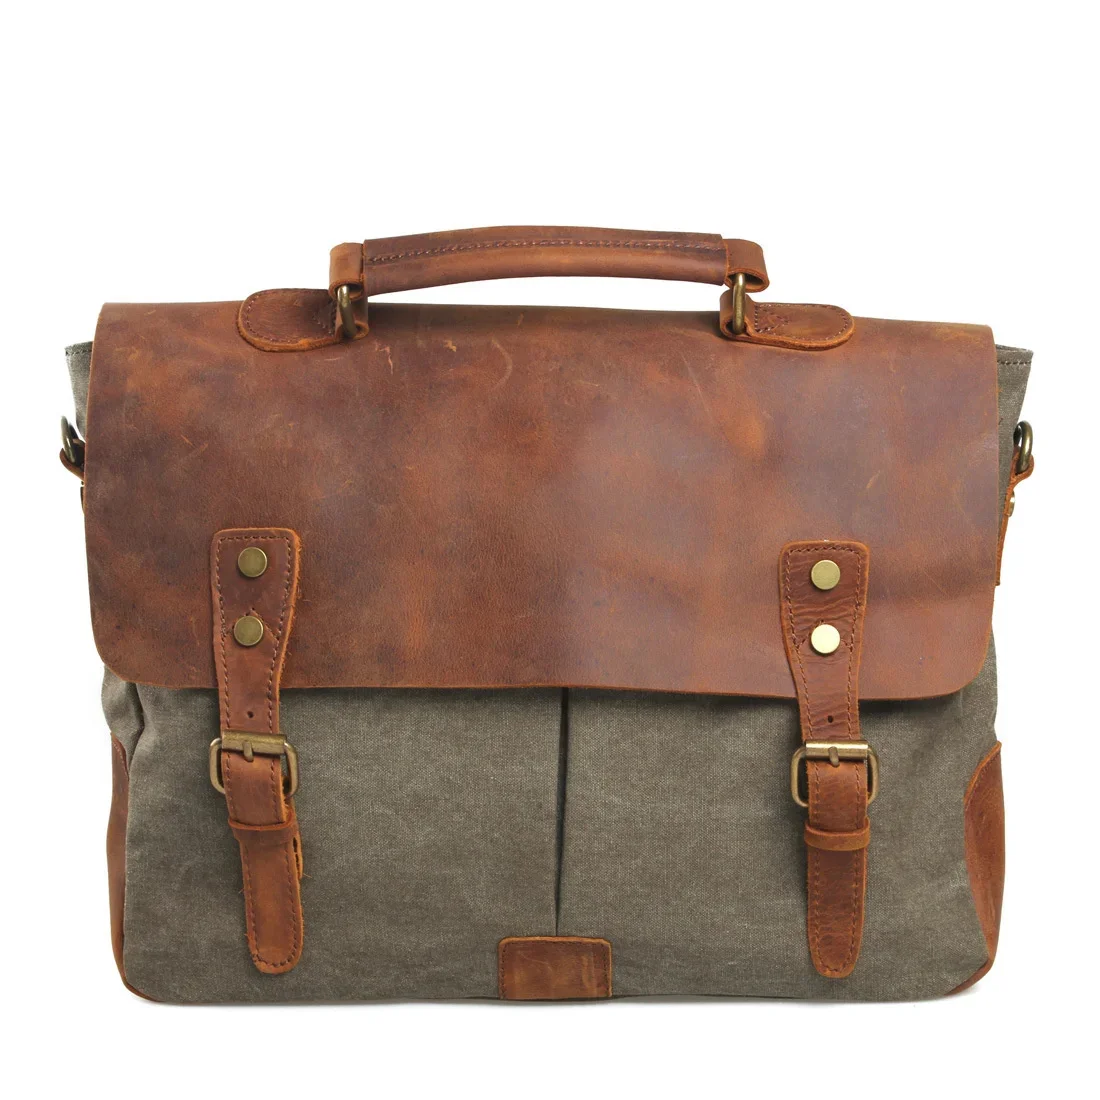 

Vintage Waxed Canvas Male Messenger Bag Oiled Leather Military Business Large Capacity School Laptop Crossbody s for men